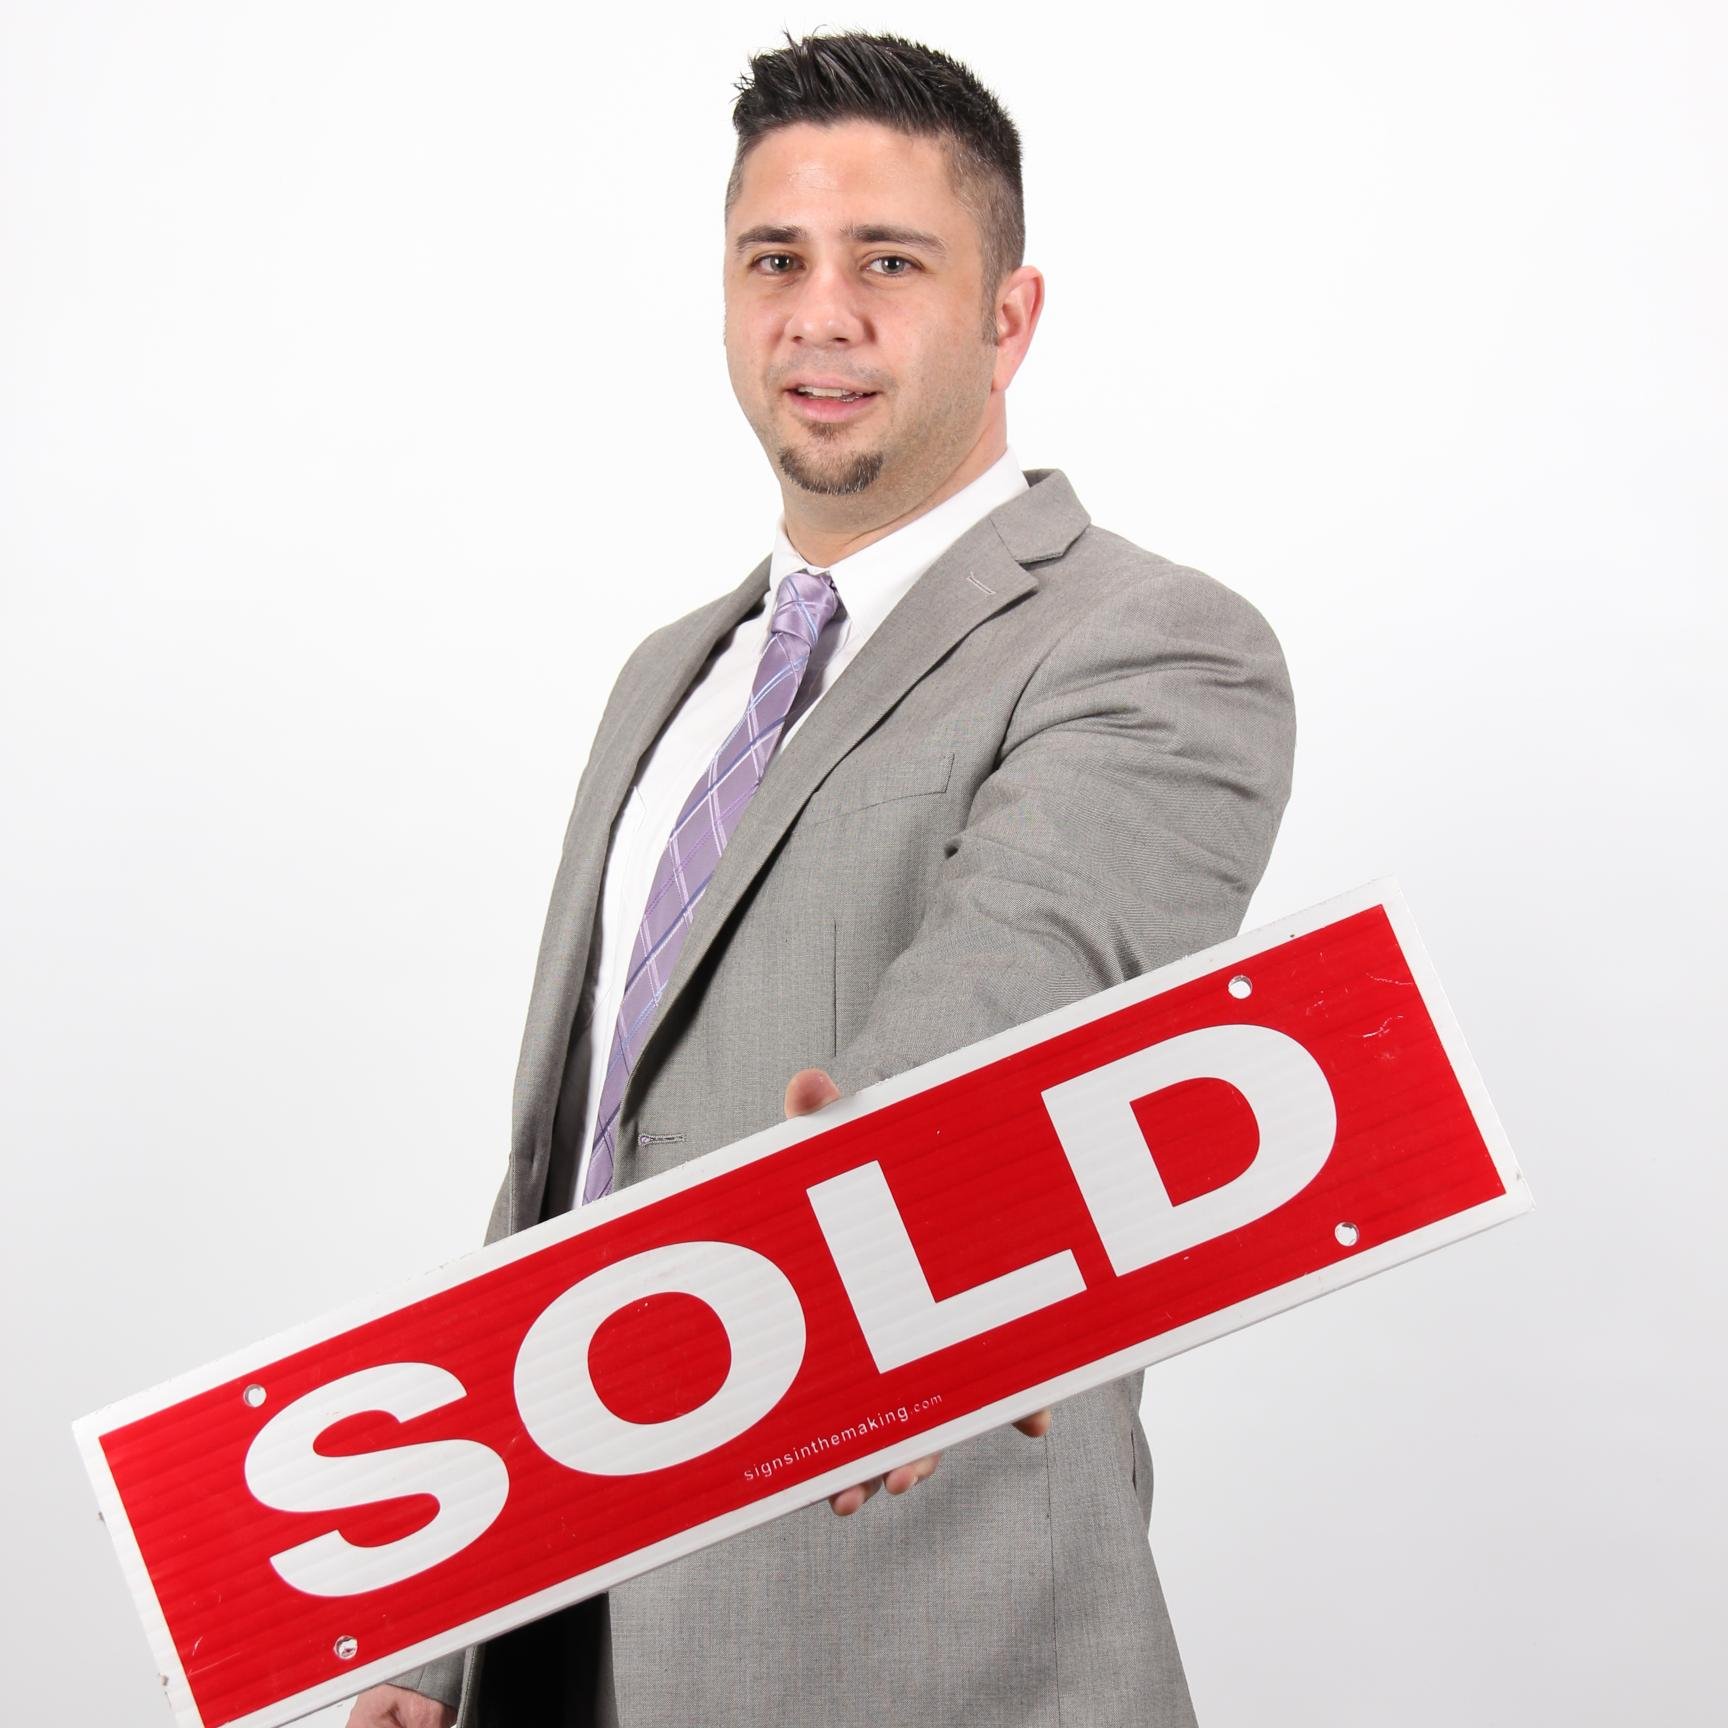 Realtor, working all over the G.T.A . Guiding people through the process of Selling, Buying, Leasing Residential & Commercial Real Estate.